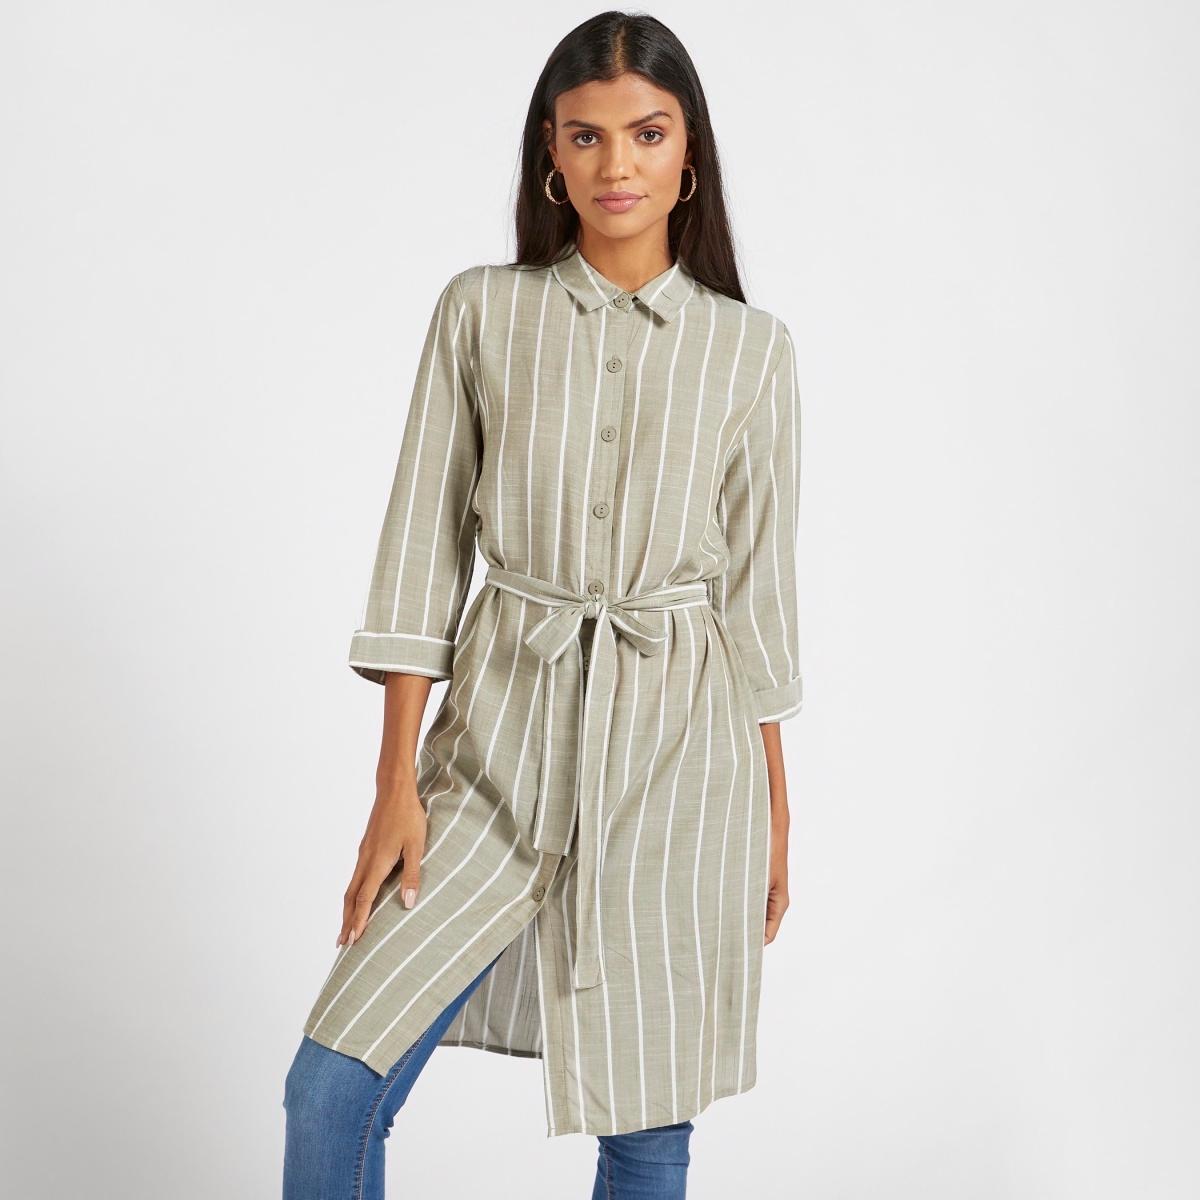 Striped Knee Length Tunic with 3/4 Sleeves and Tie-Up Waist Belt